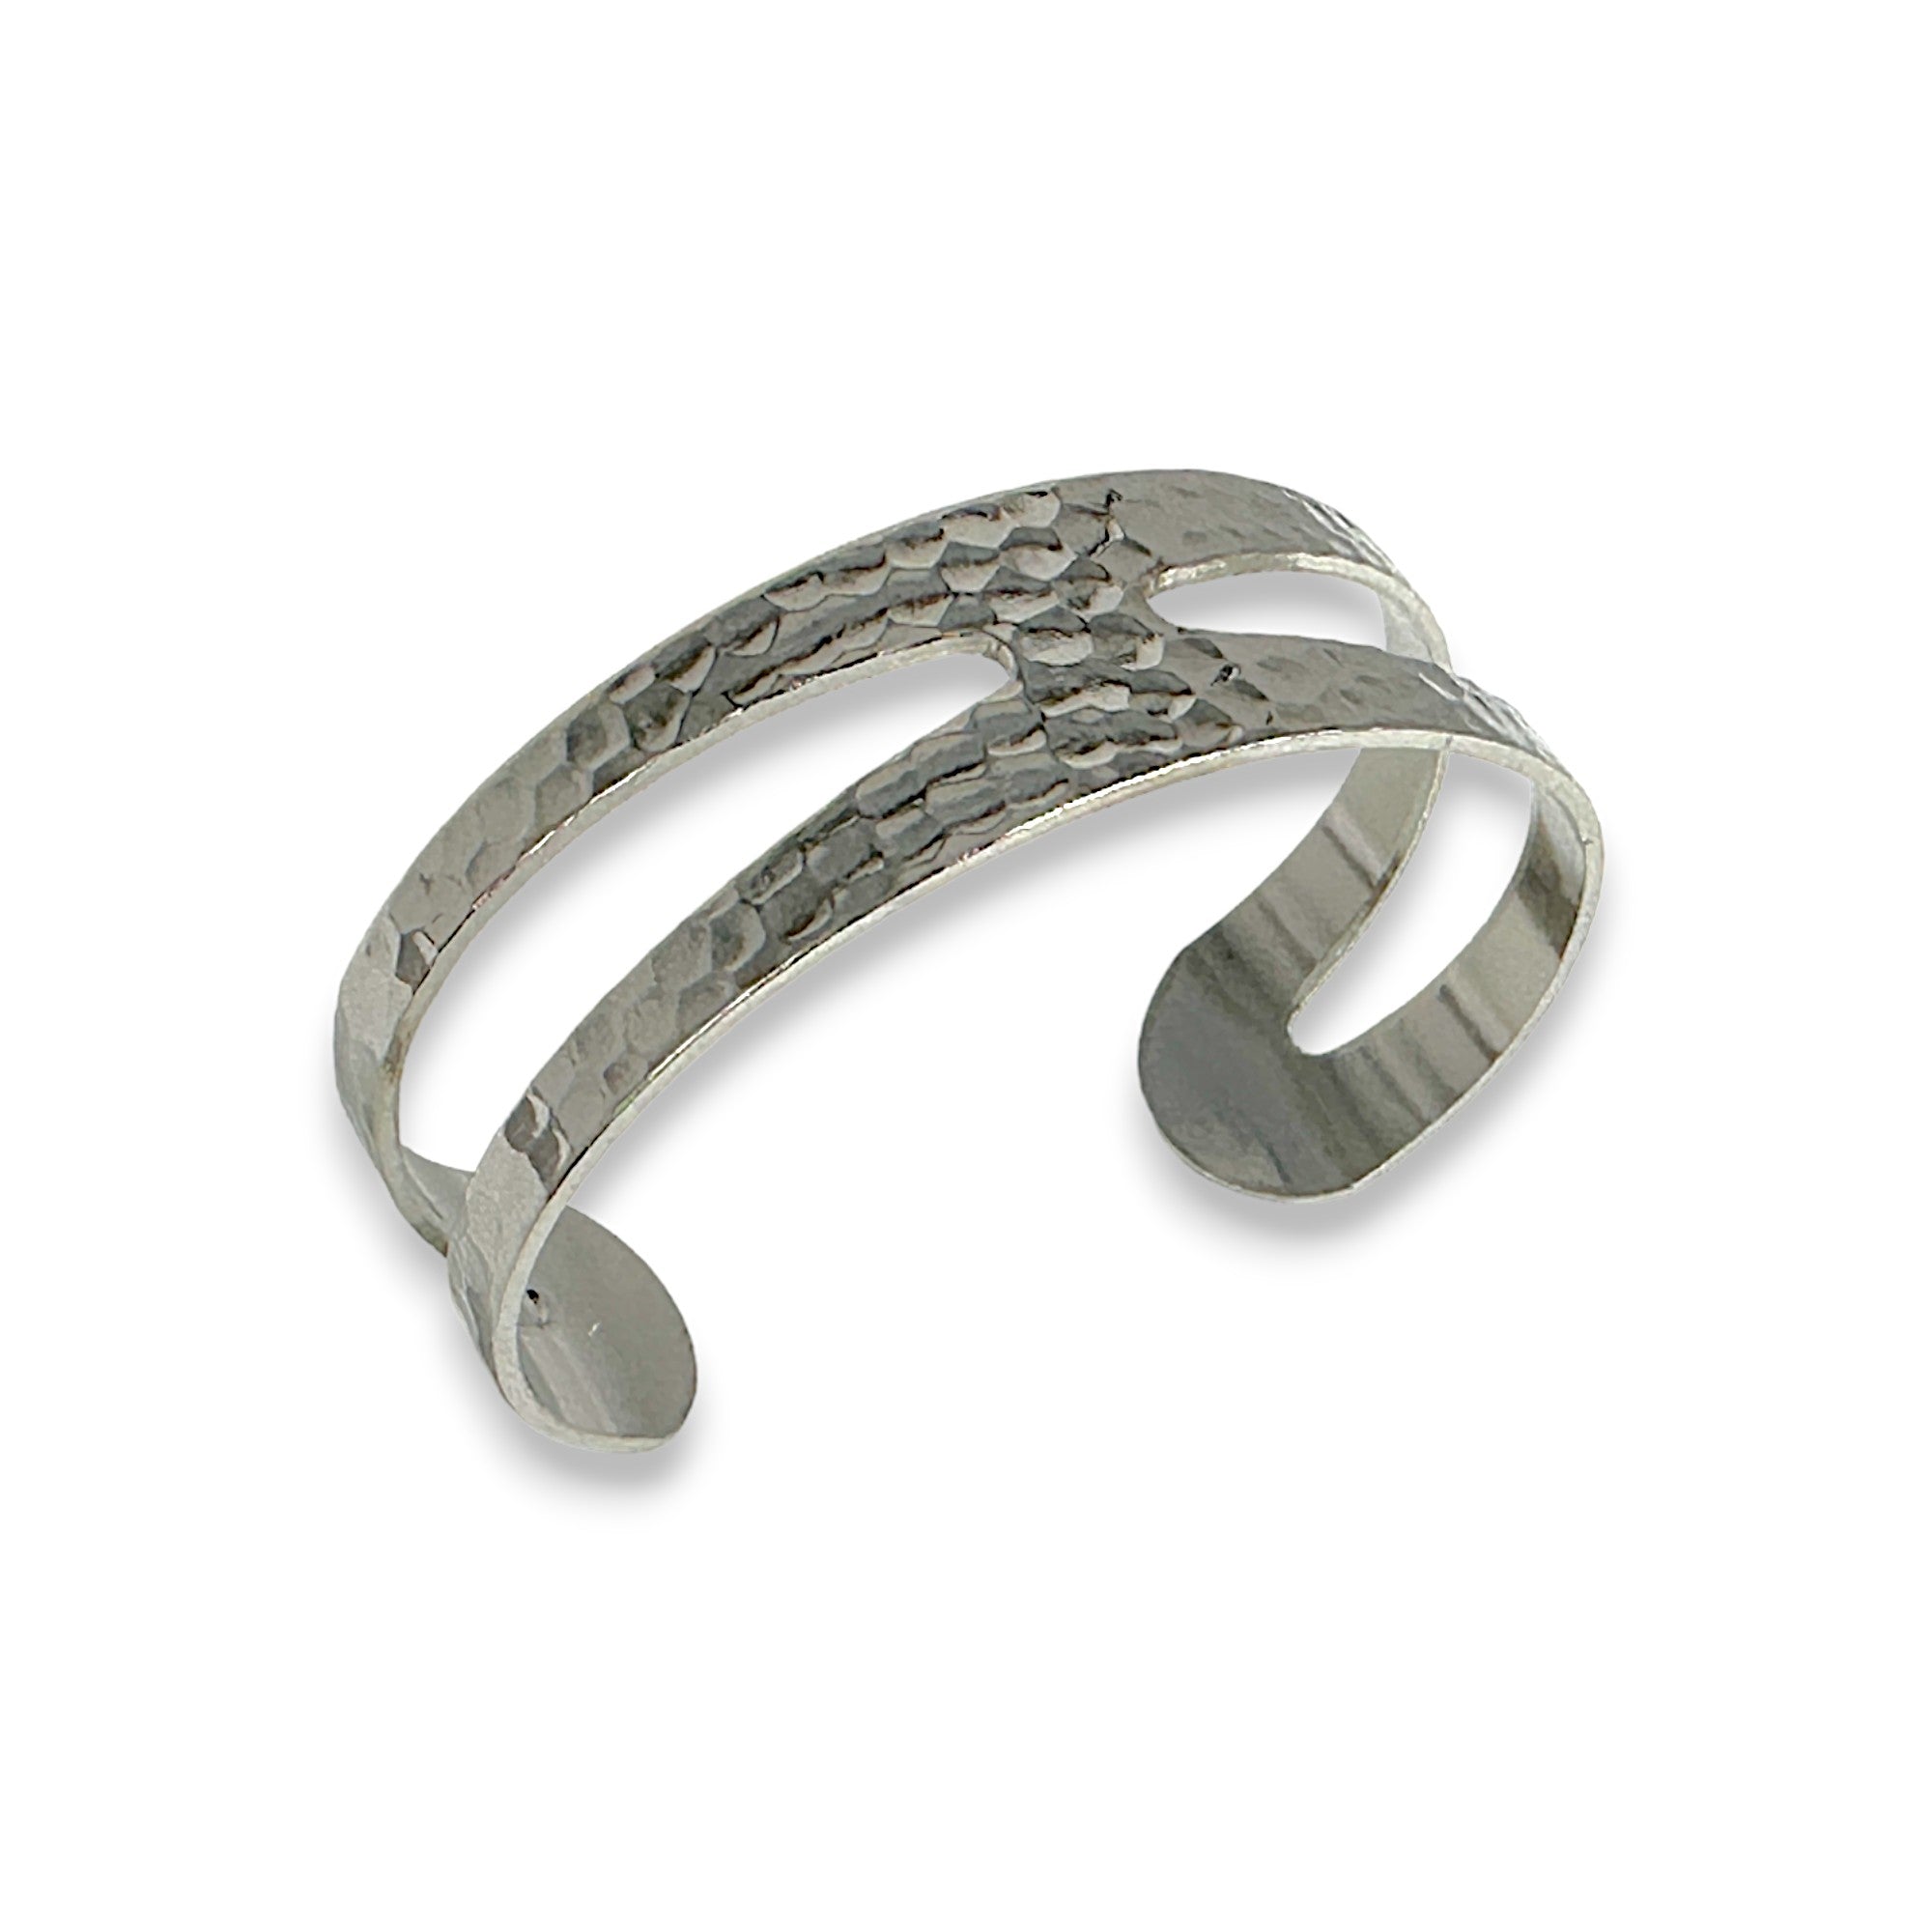 Double Cutout Hammered Cuff Bracelet